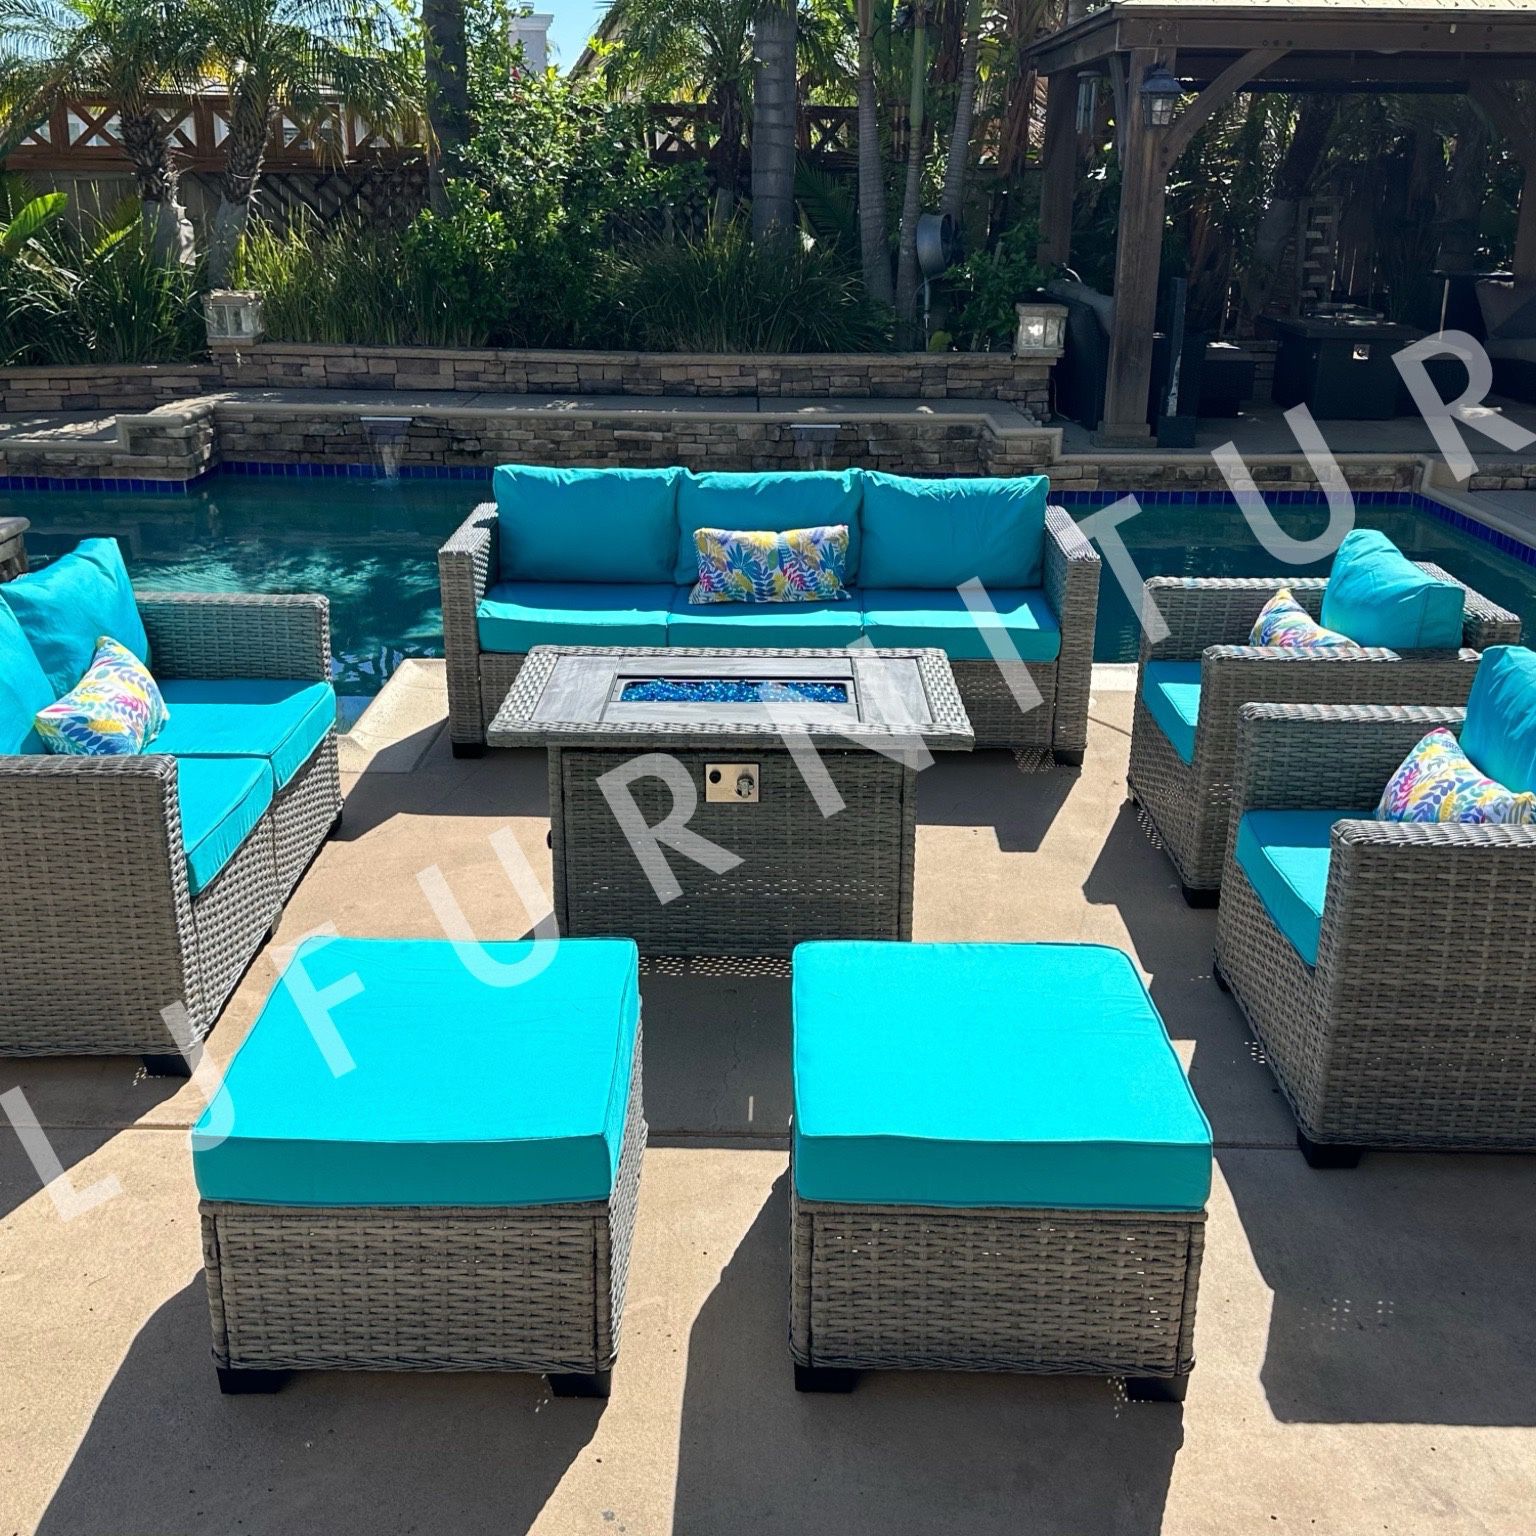 NEW🔥Outdoor Patio Furniture HDPE WICKER Grey with Turquoise 4" cushions and Firepit ASSEMBLED